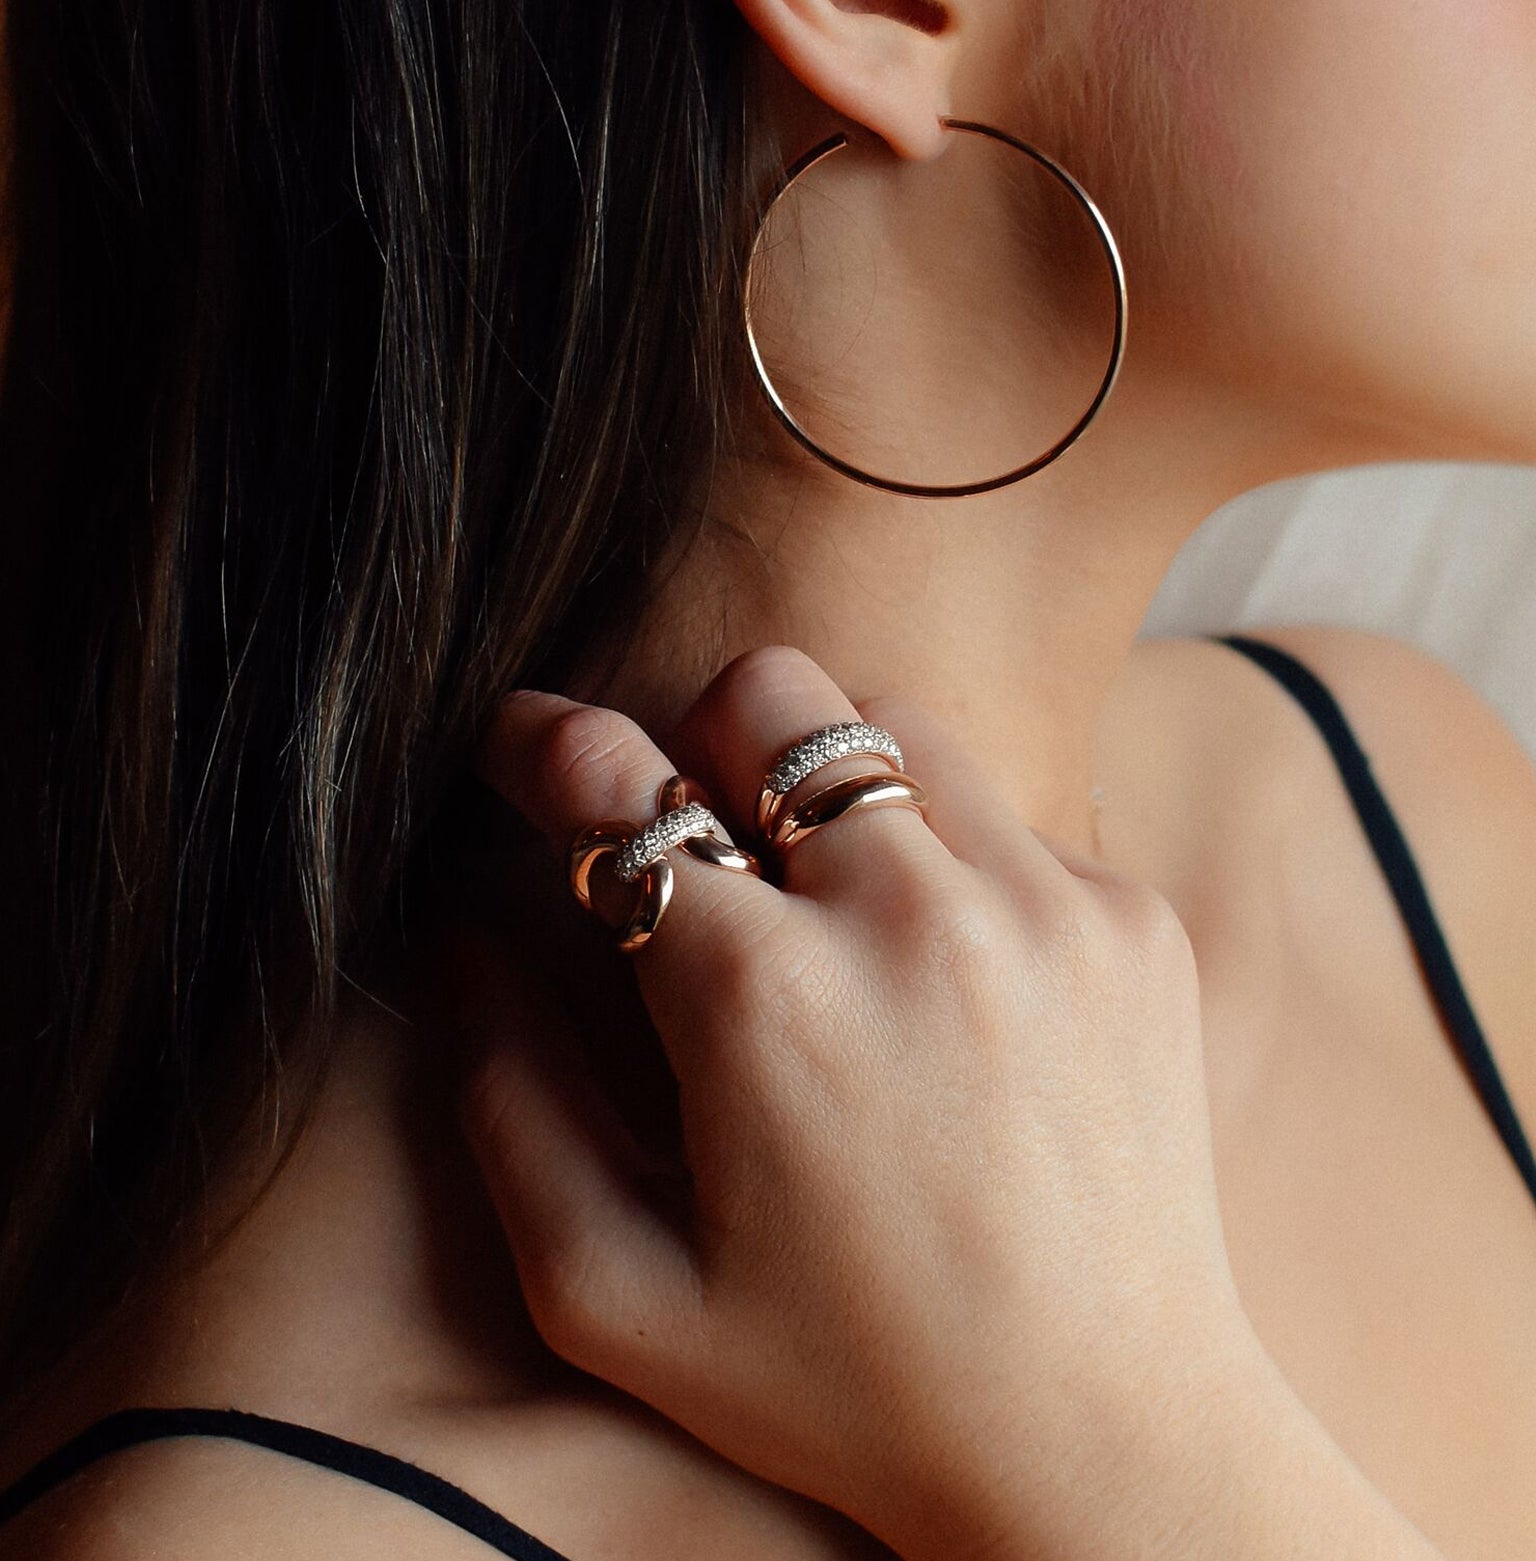 5cm Skinny Hoops shown in rose gold styled with the Love Lock Ring and Gemini Ring.